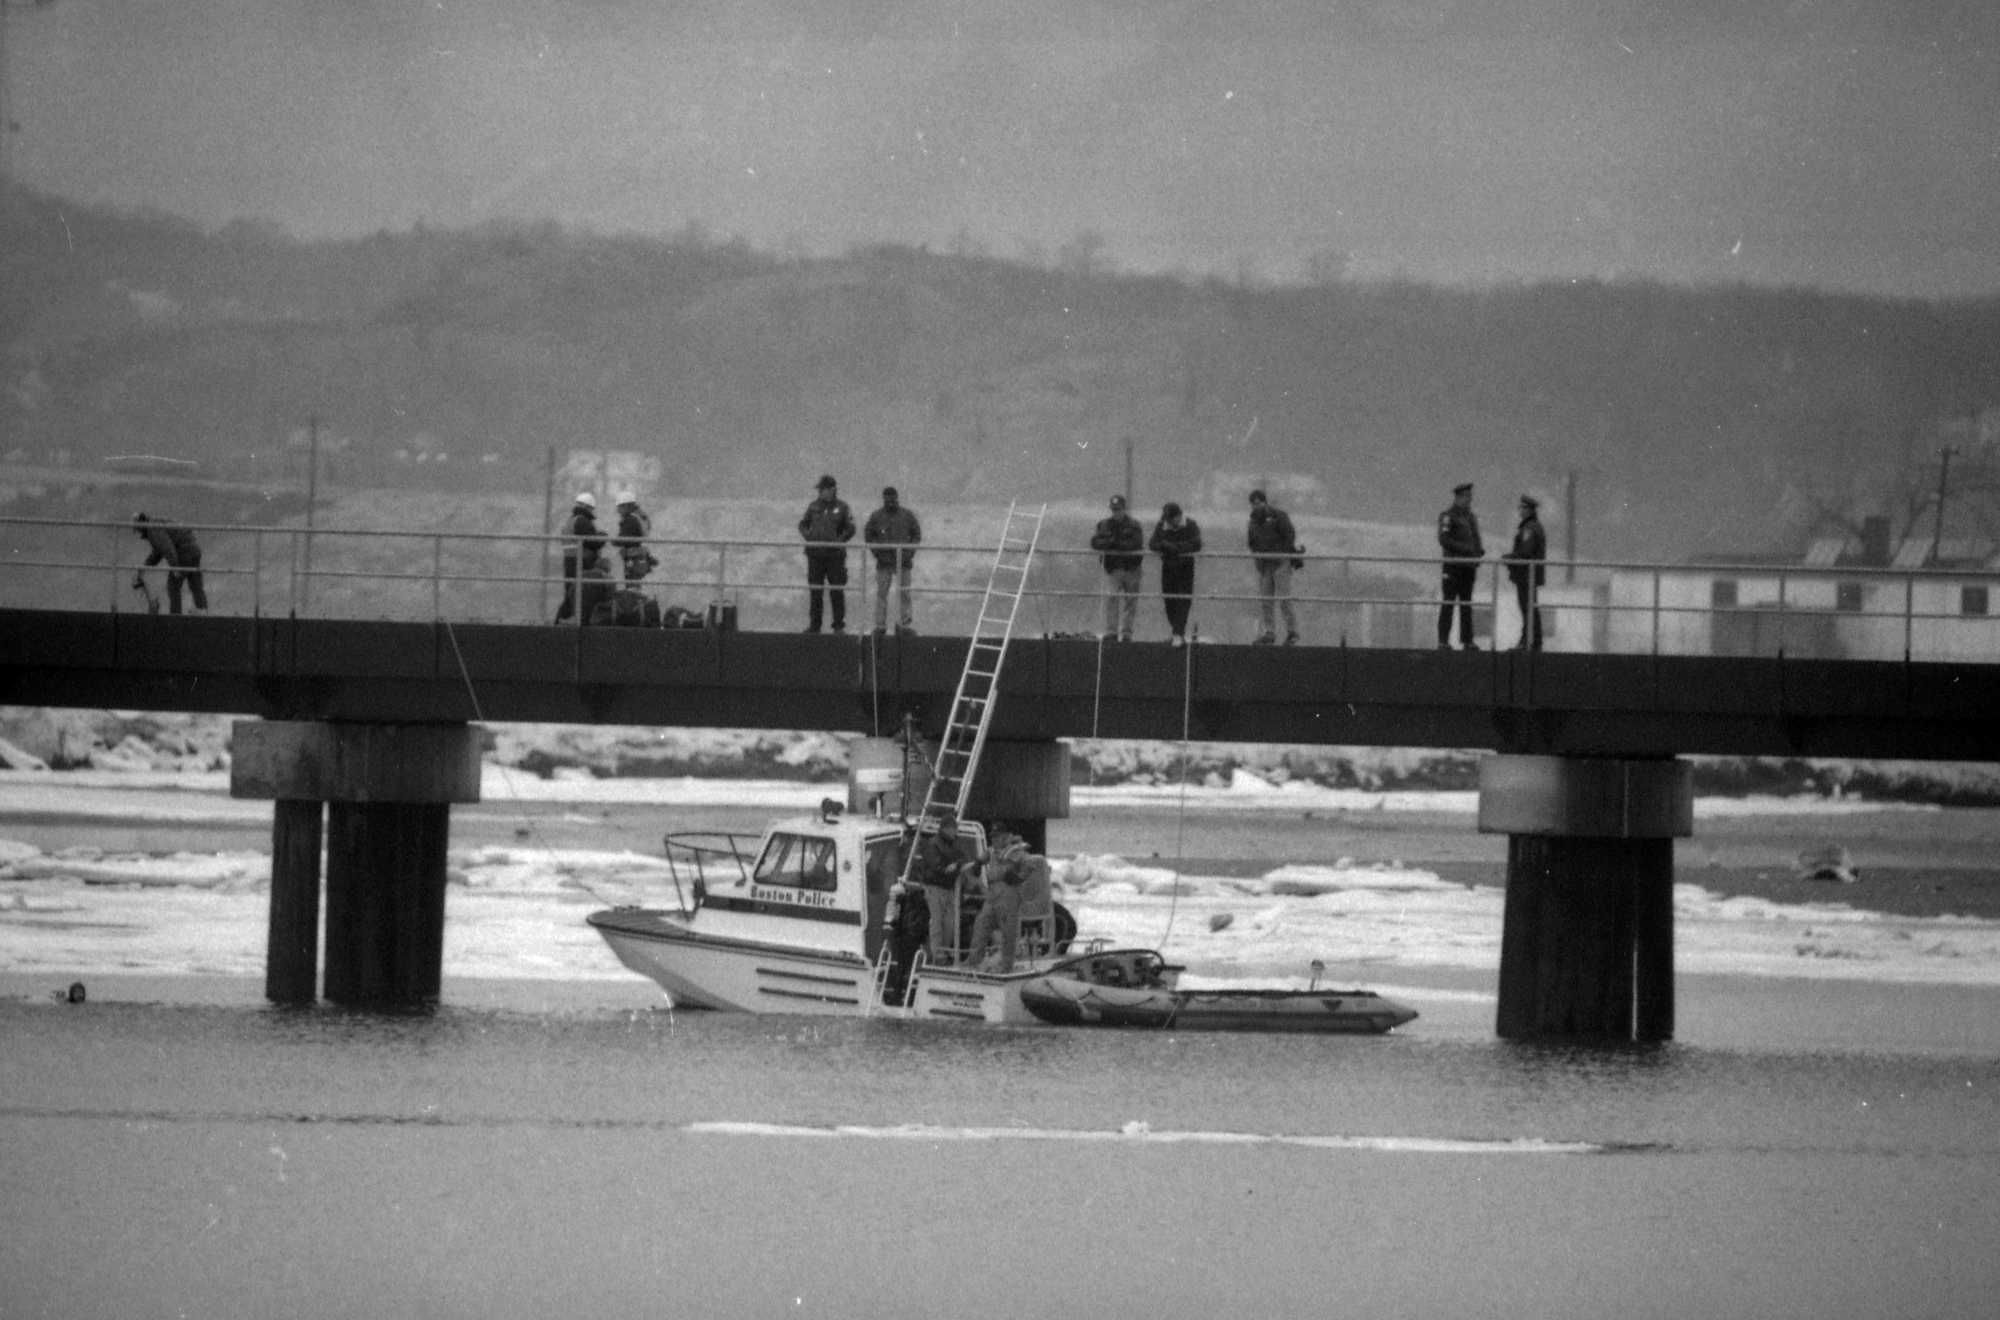 On Jan. 5, 1990, Boston police divers searched the Pines River for the gun used in the murder of Carol Stuart.